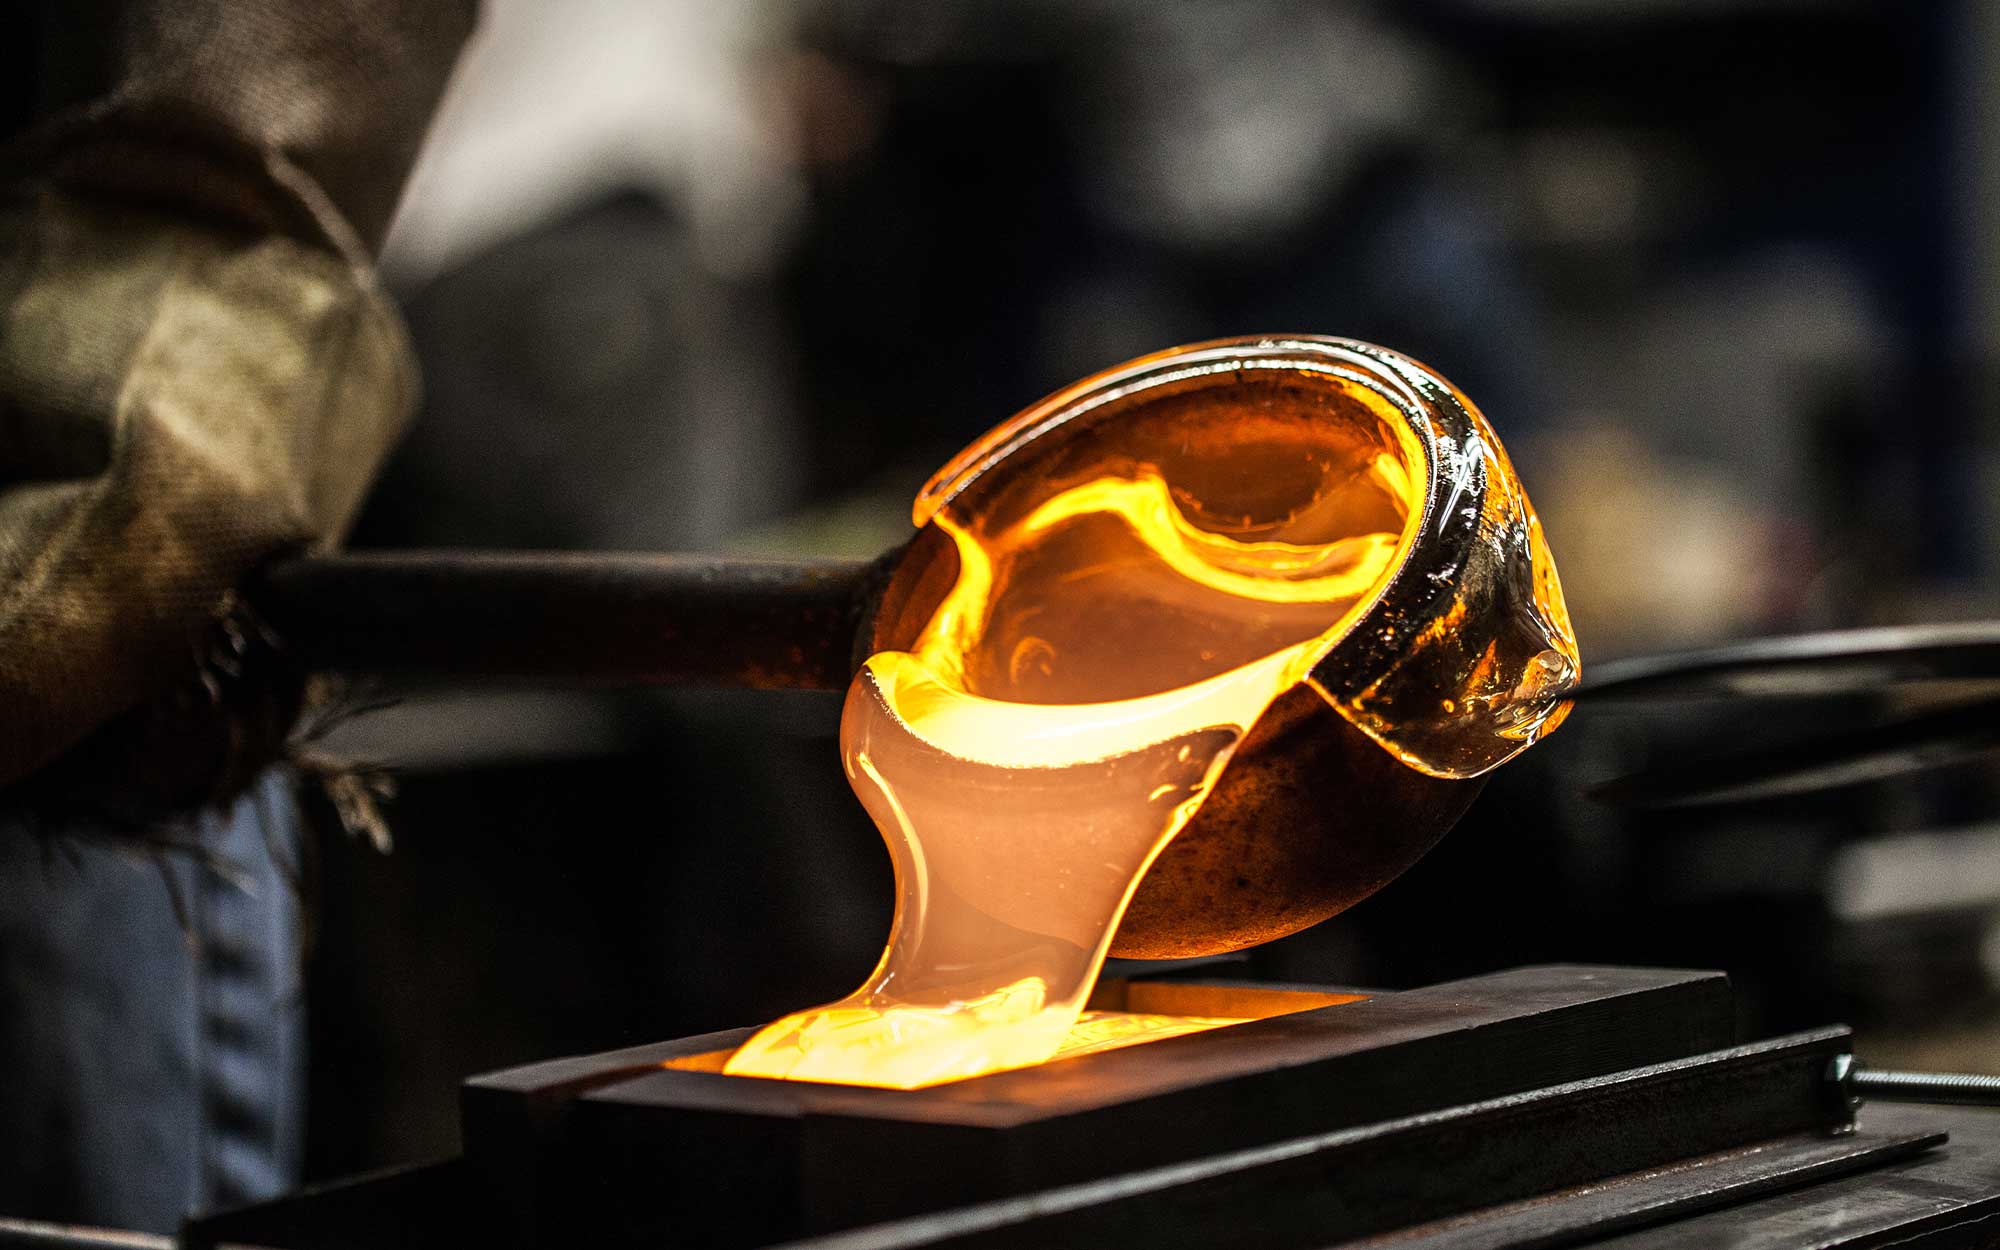 Glassmaker pouring melted sand into glass mold